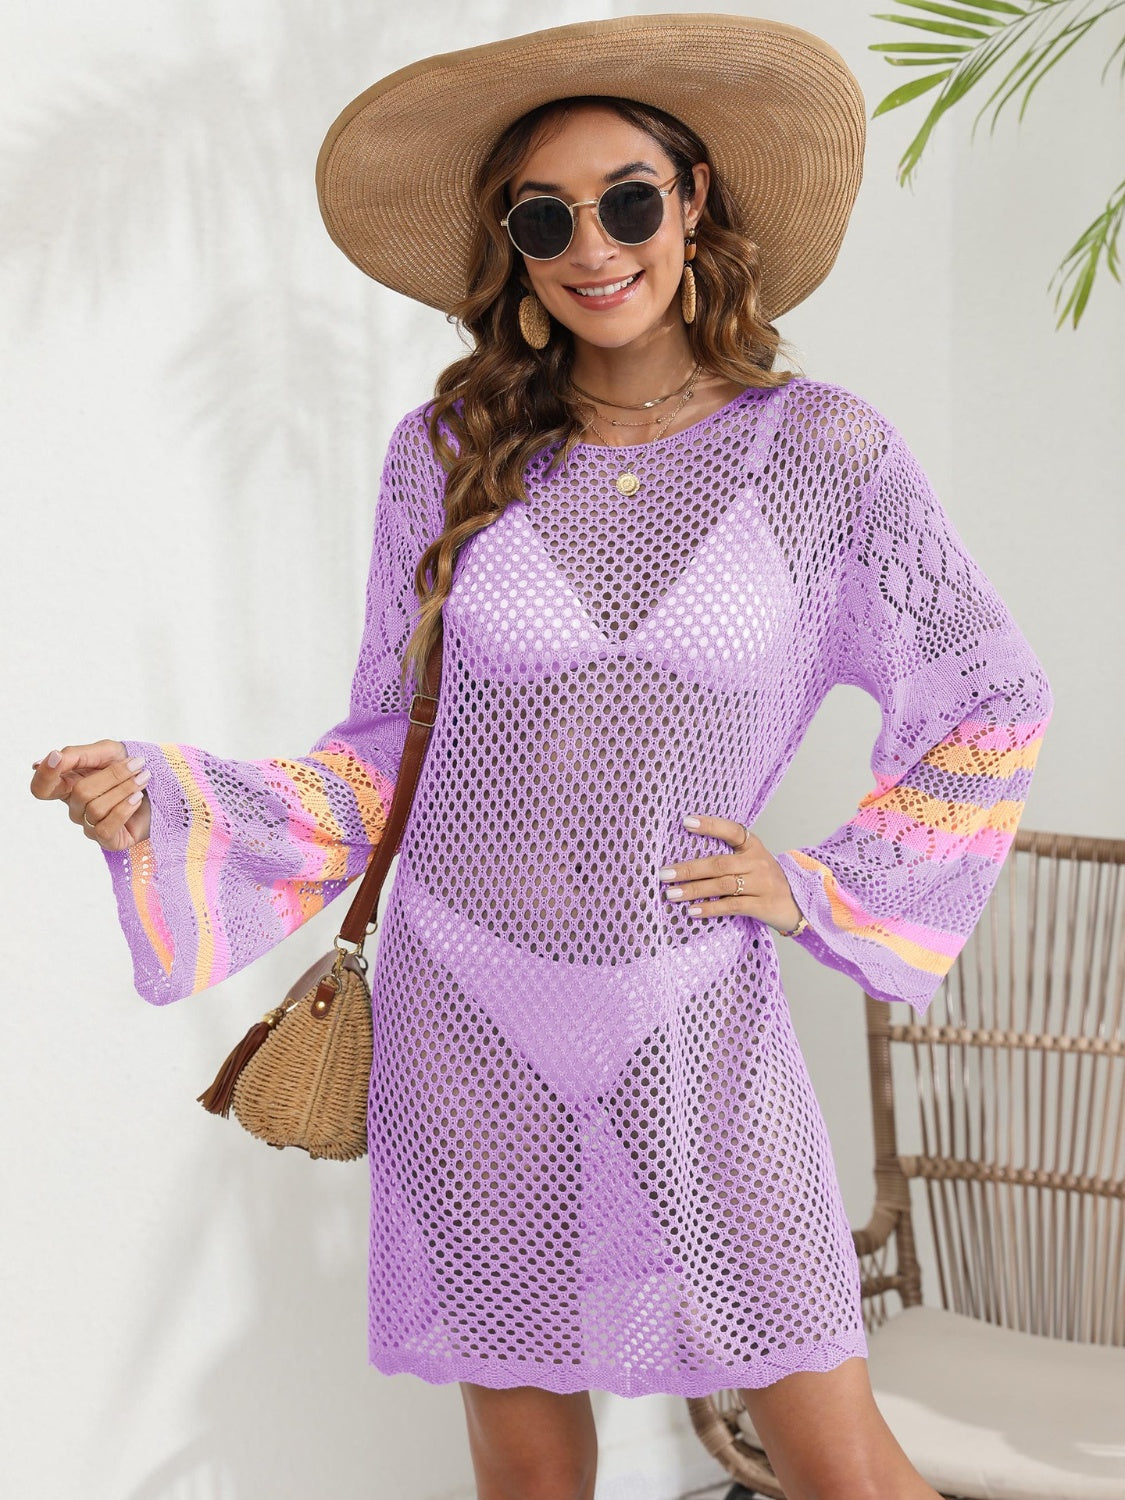 Sunset Vacation  Openwork Contrast Long Sleeve Cover-Up  Sunset and Swim   